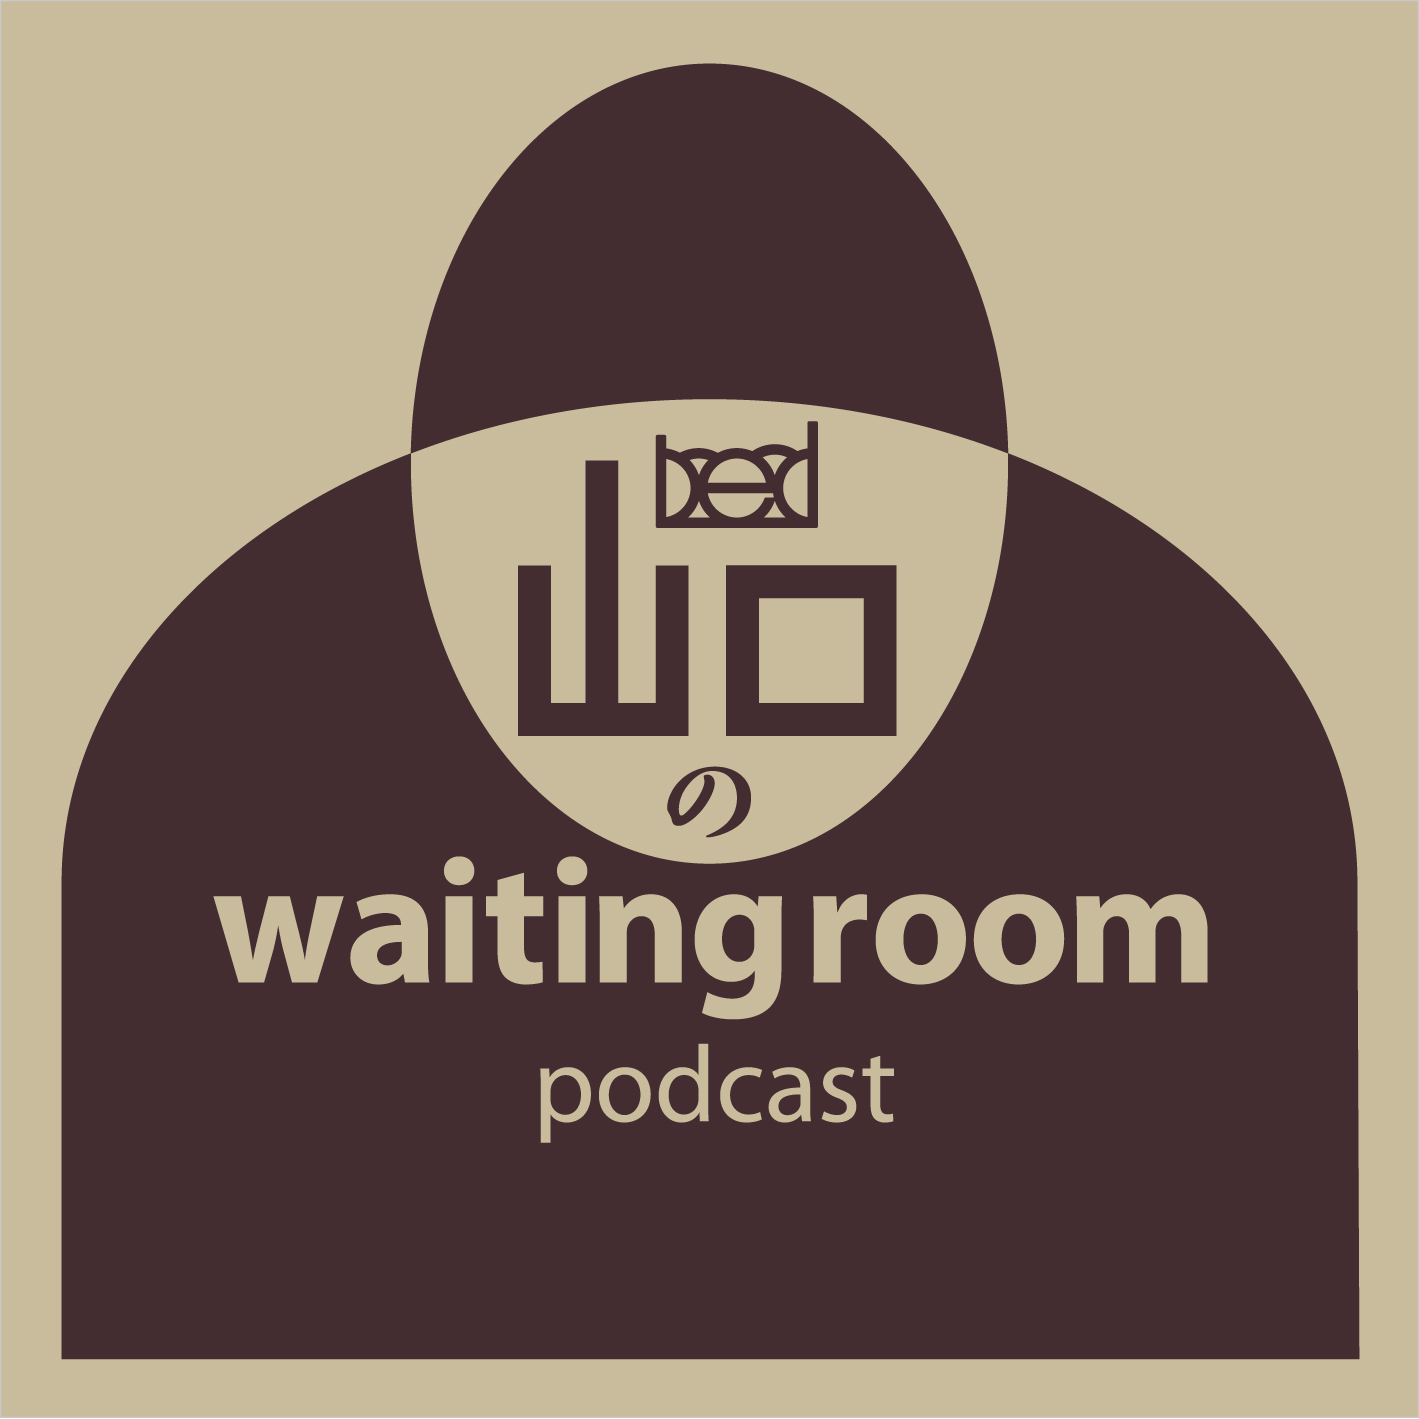 bed山口のwaiting room podcast